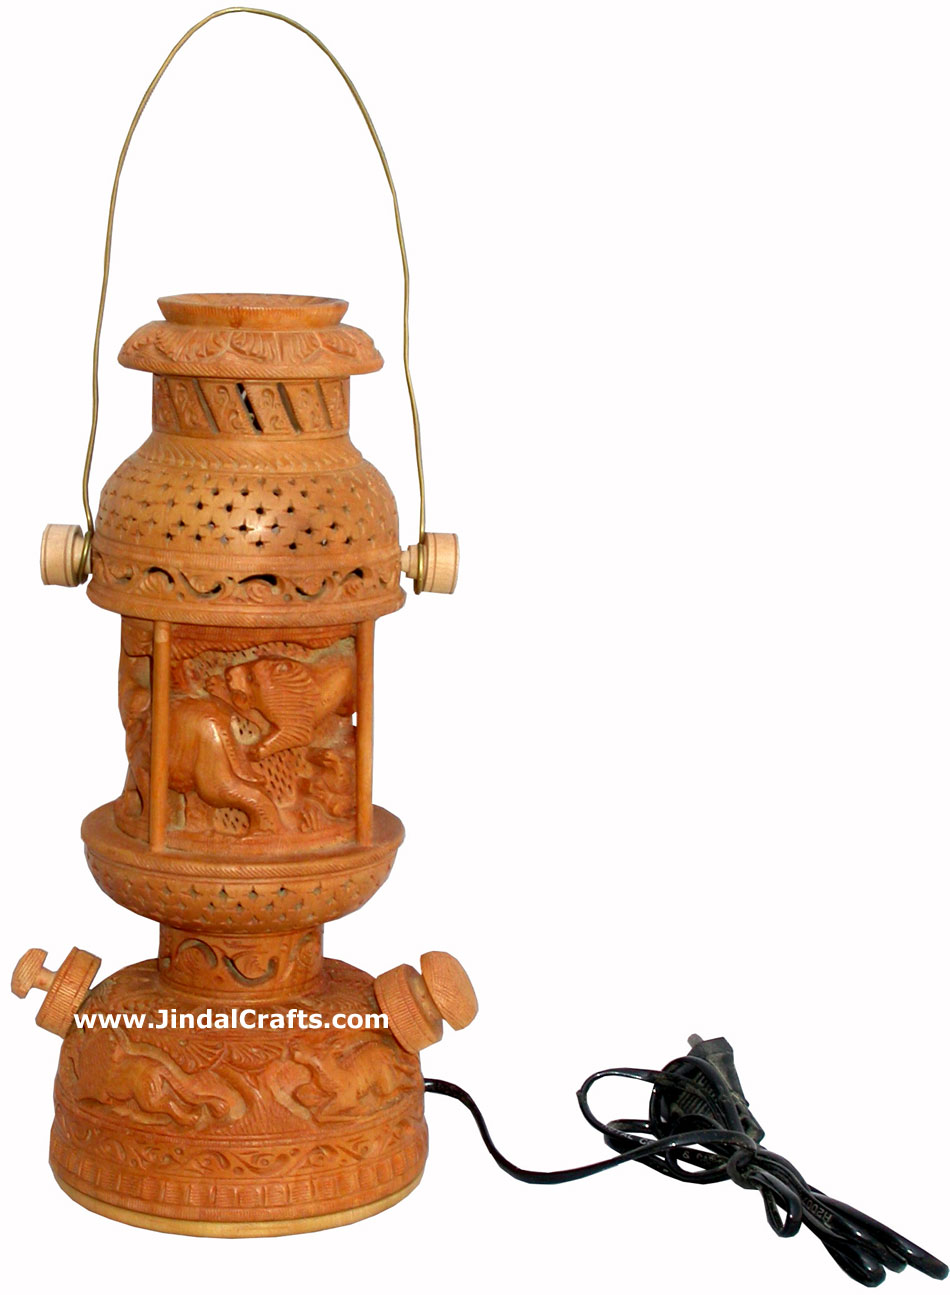 Wood Jungle Lamp Shade Hand Carved Jaali Design Rich Art Handicrafts from India